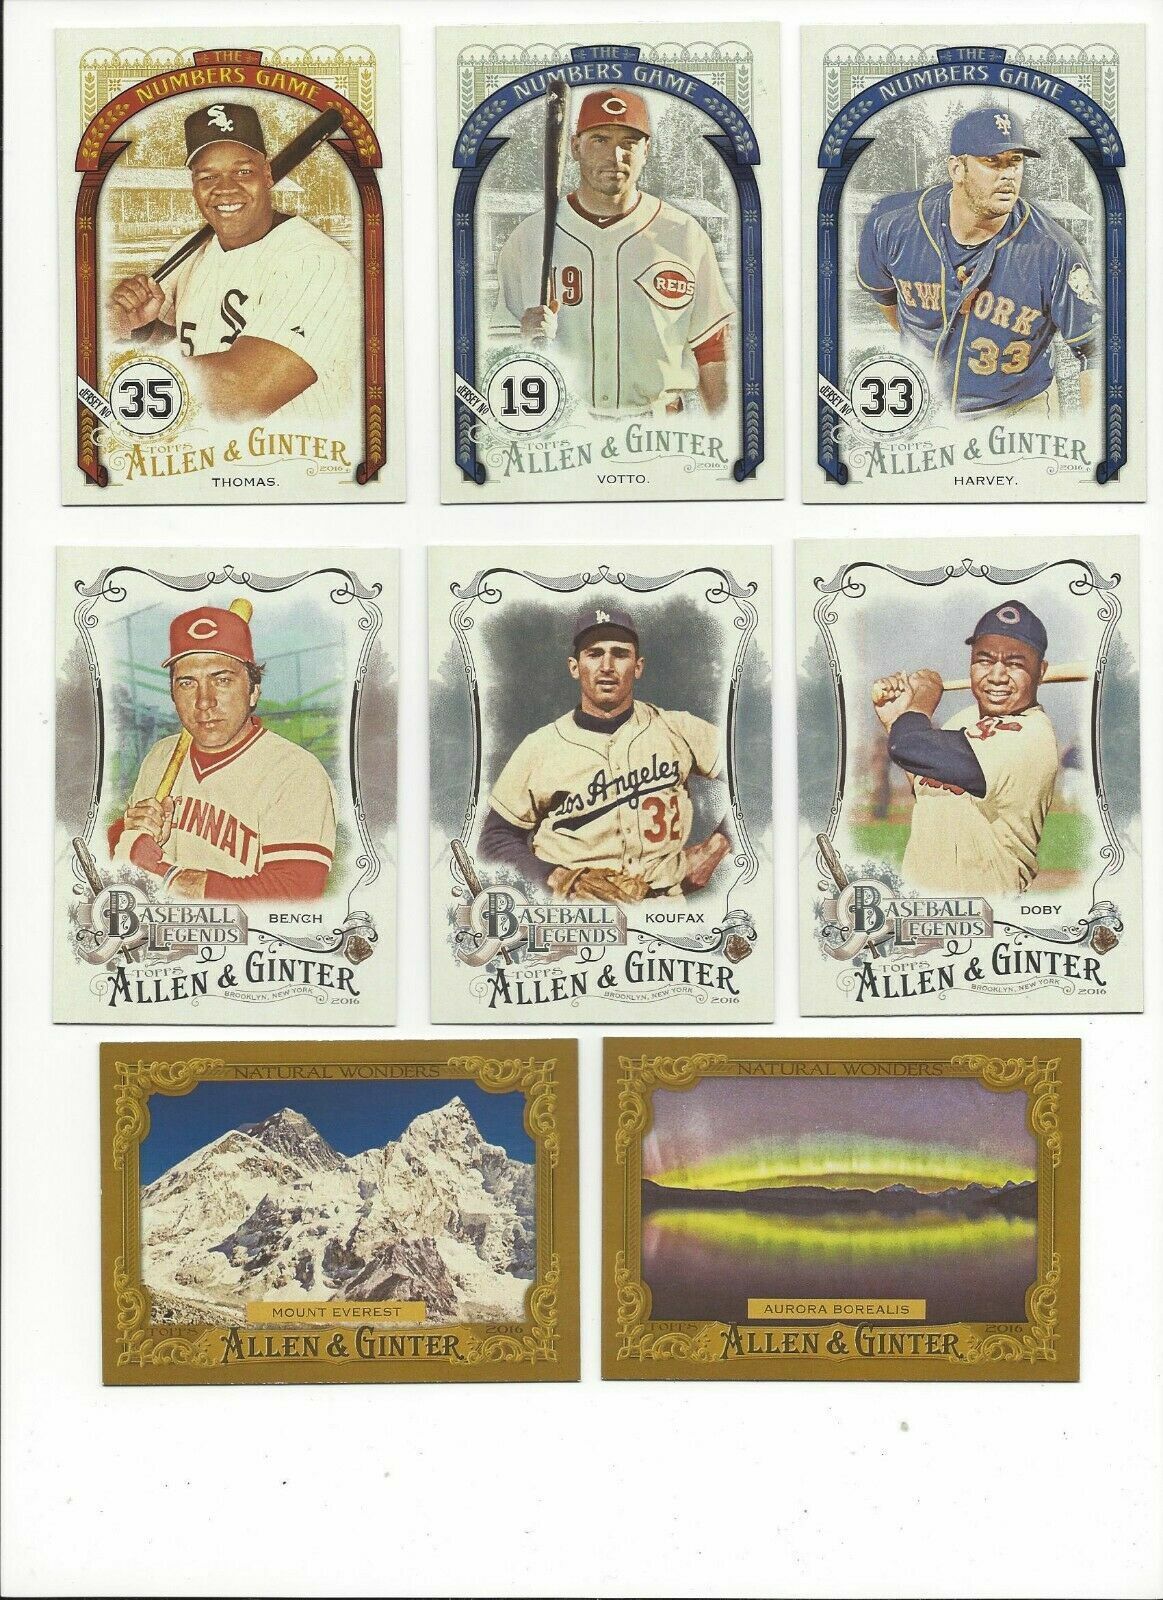 2016 TOPPS ALLEN & GINTER INSERTS - LEGENDS, NUMBERS GAME, WONDERS - YOU PICK